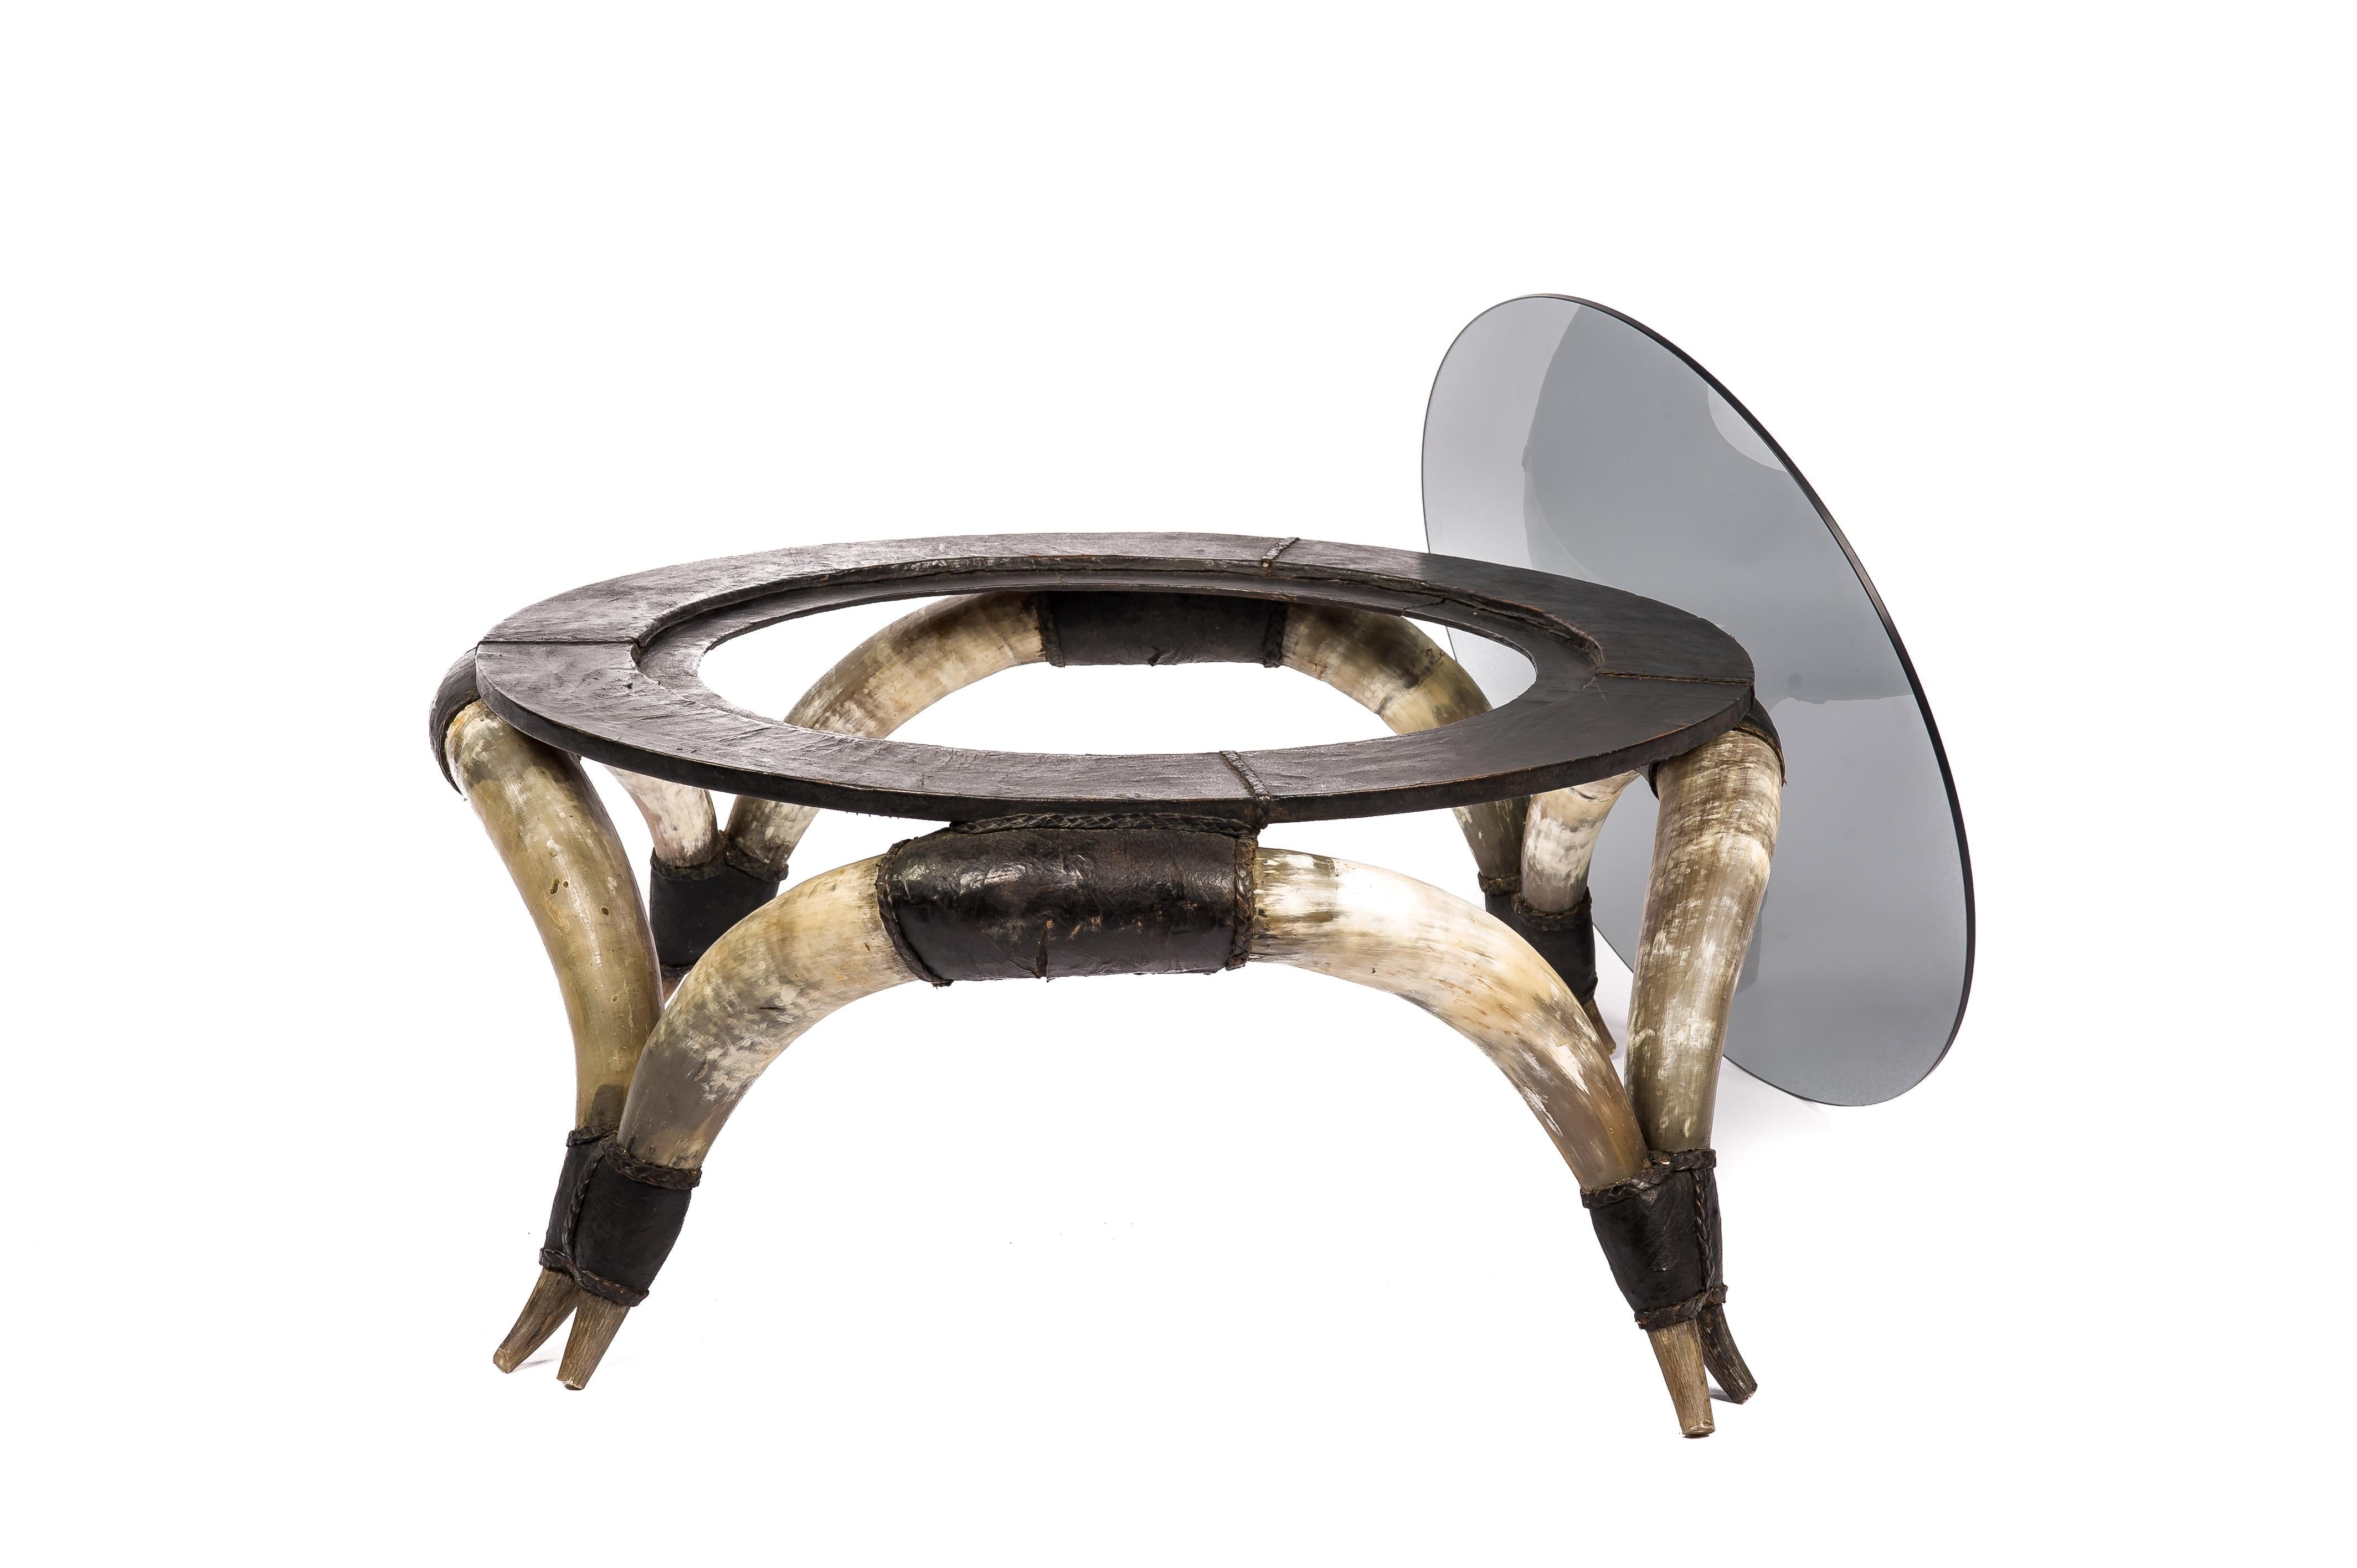 Vintage Round Coffee Table with Bull Horns, Black Leather, and Smoked Glass In Good Condition For Sale In Casteren, NL